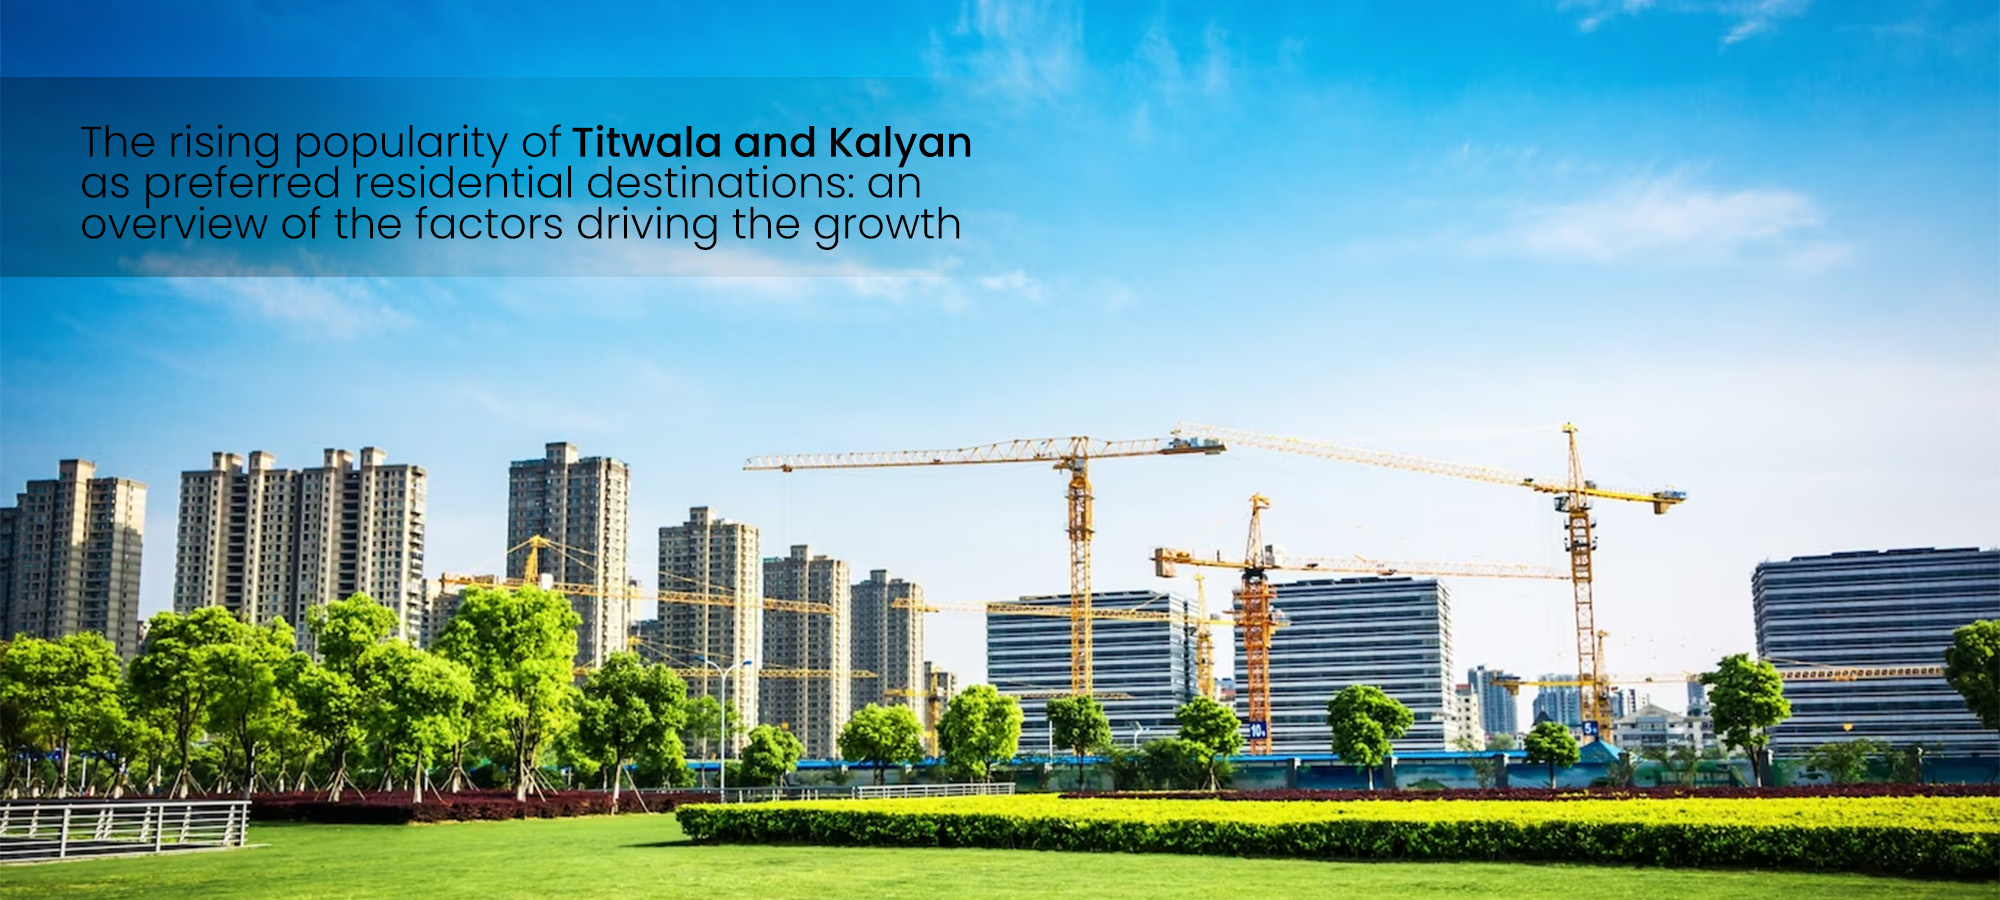 The Rising Popularity of Titwala and Kalyan as Preferred Residential Destinations An Overview of the Factors Driving the Growth